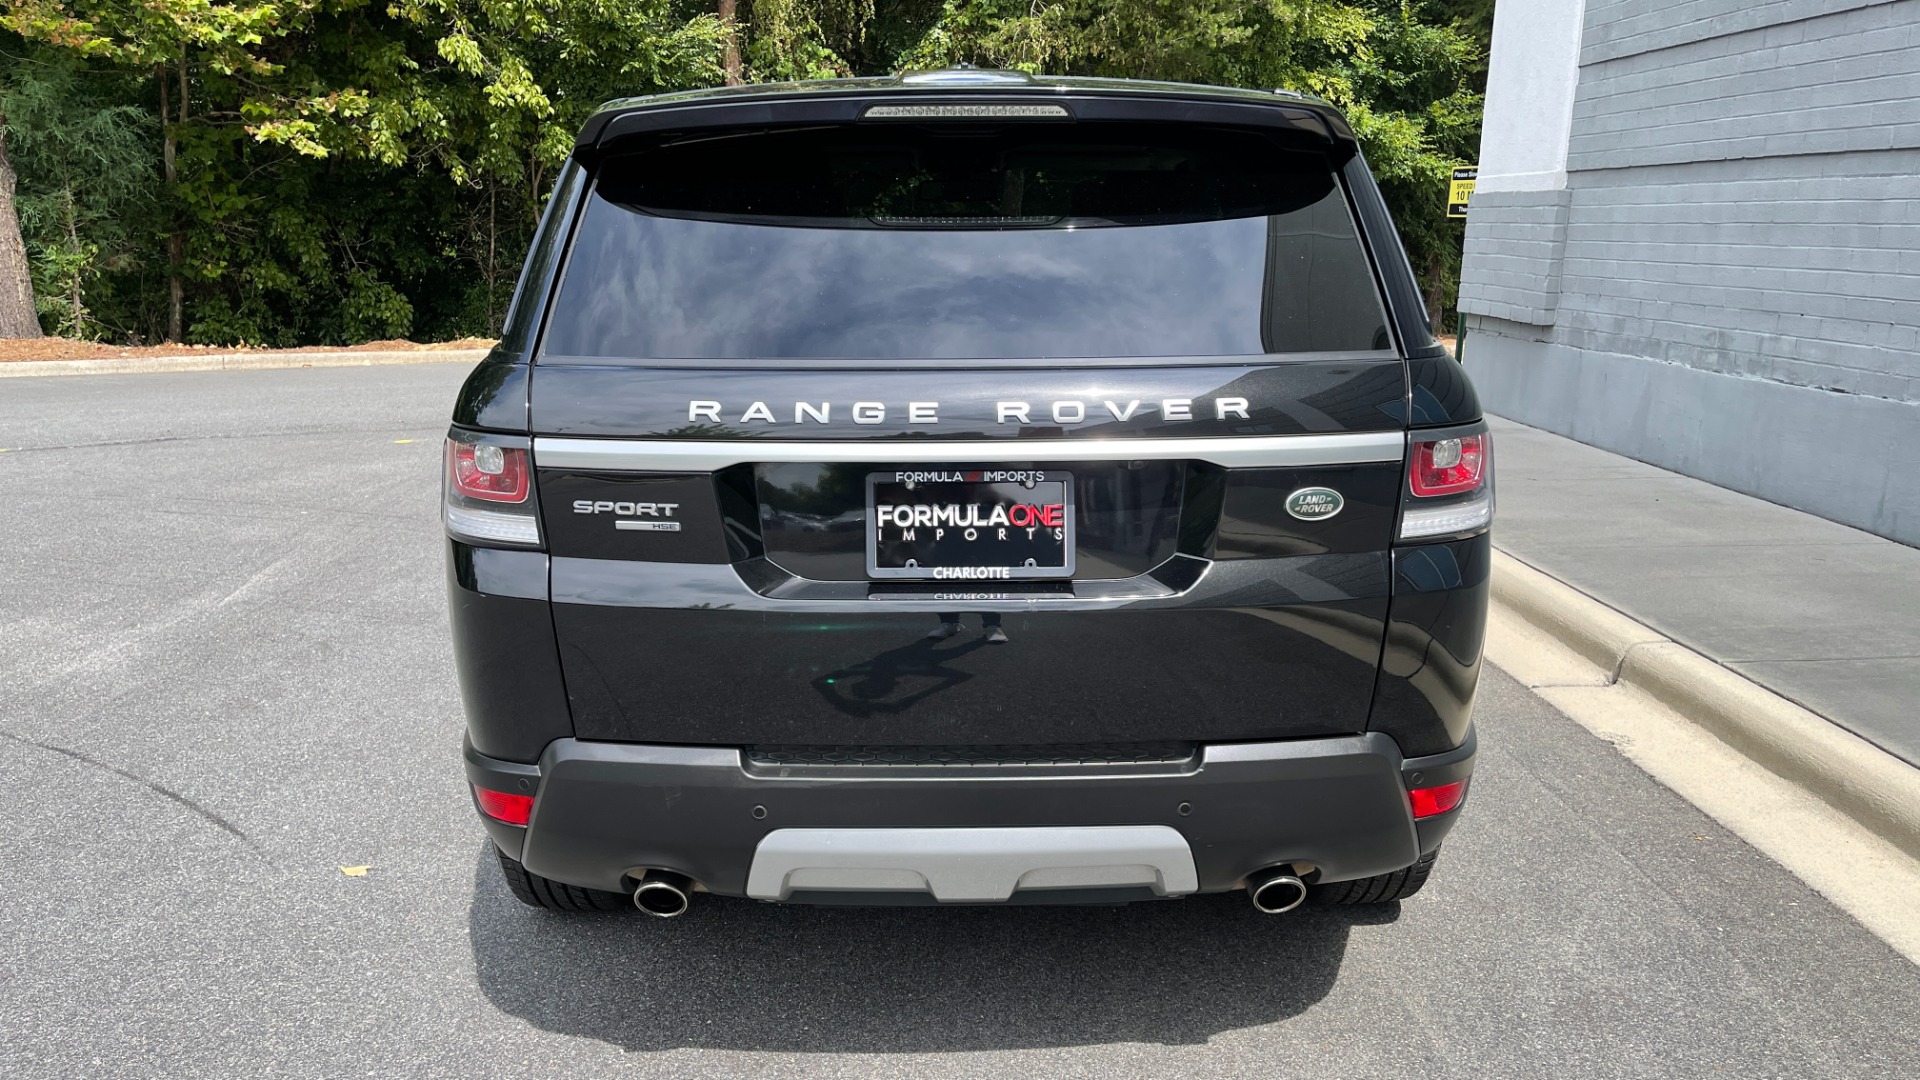 Used 2015 Land Rover Range Rover Sport HSE / SUPERCHARGED / MERIDIAN SOUND / DRIVER ASSISTANCE / PANORAMIC ROOF /  for sale Sold at Formula Imports in Charlotte NC 28227 8